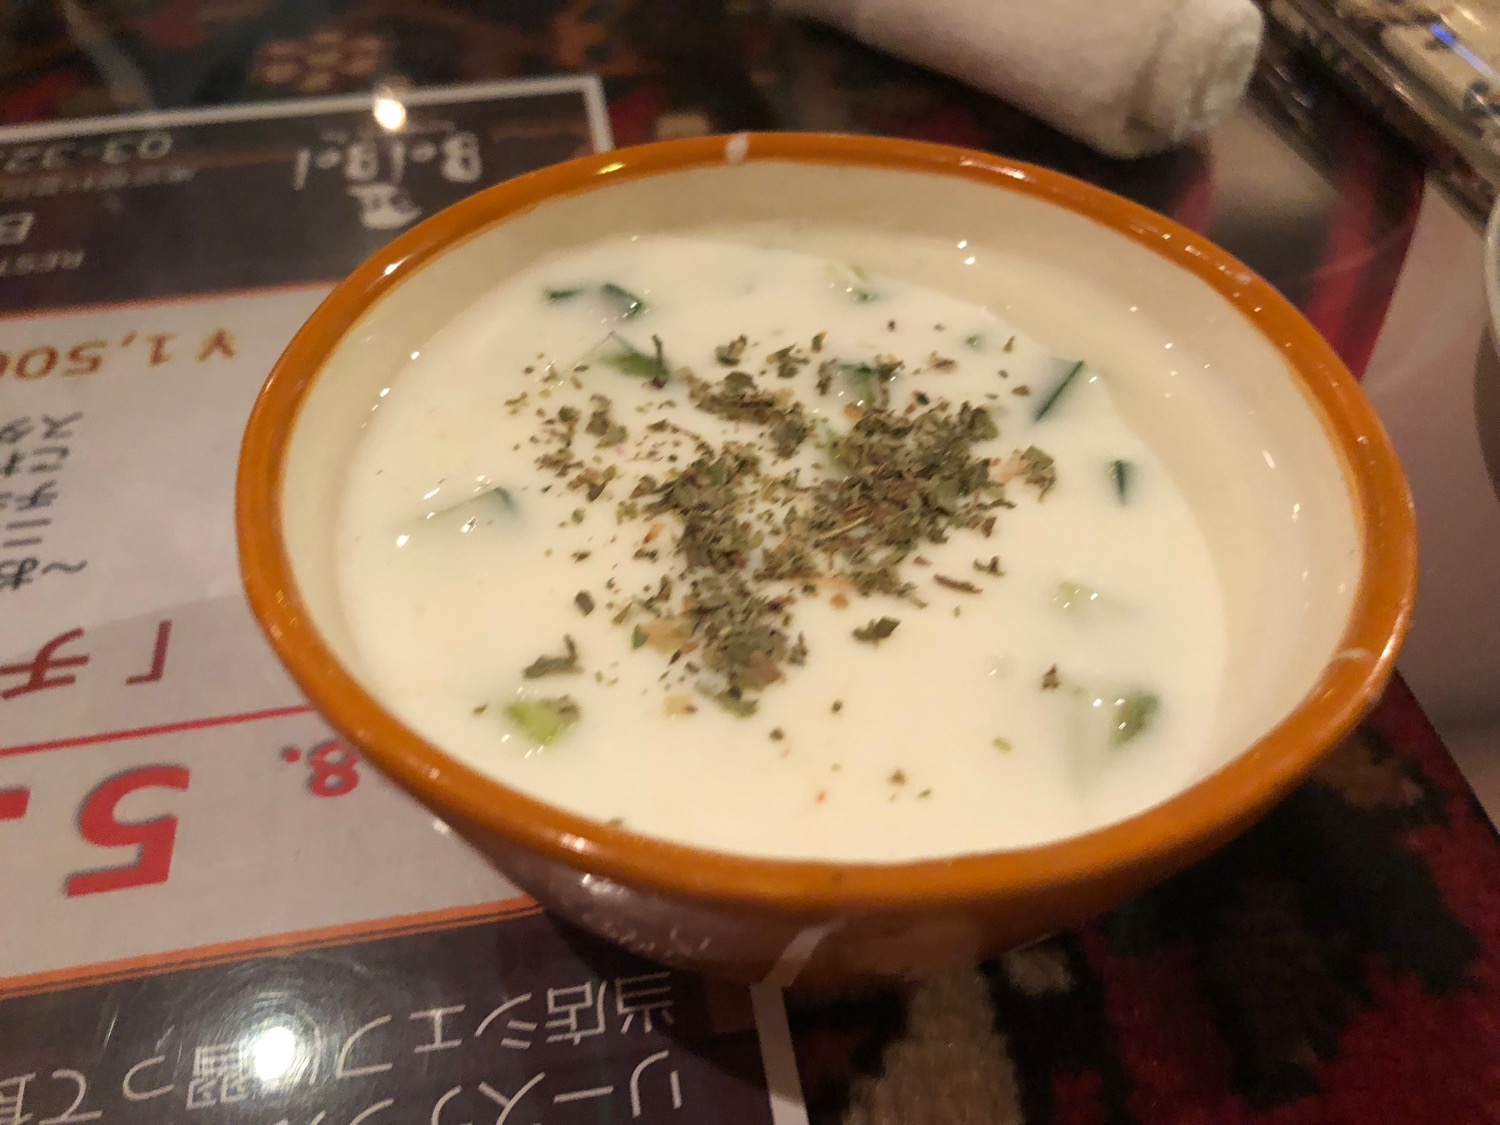 a bowl of soup with herbs in it